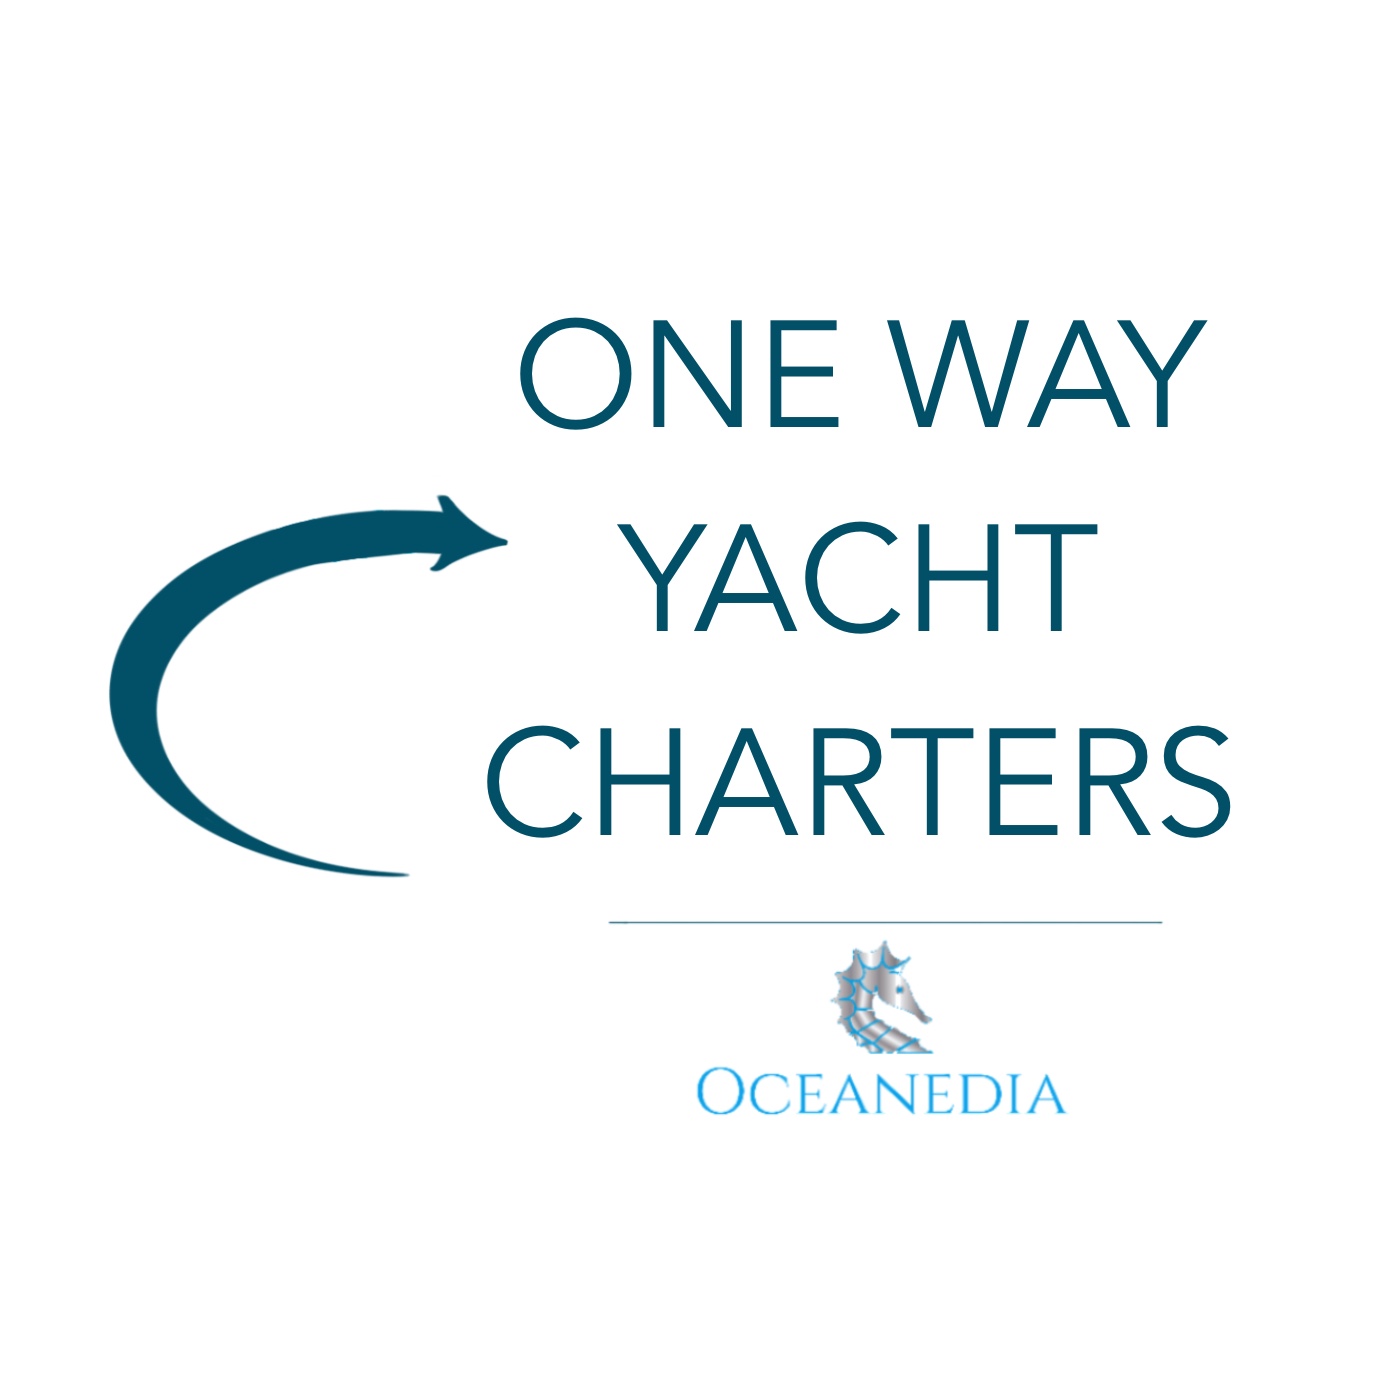 One Way Yacht Charters by Oceanedia | Plan and book your sublime sailing escape now, onboard premium sailing yachts, catamarans and motor yachts.